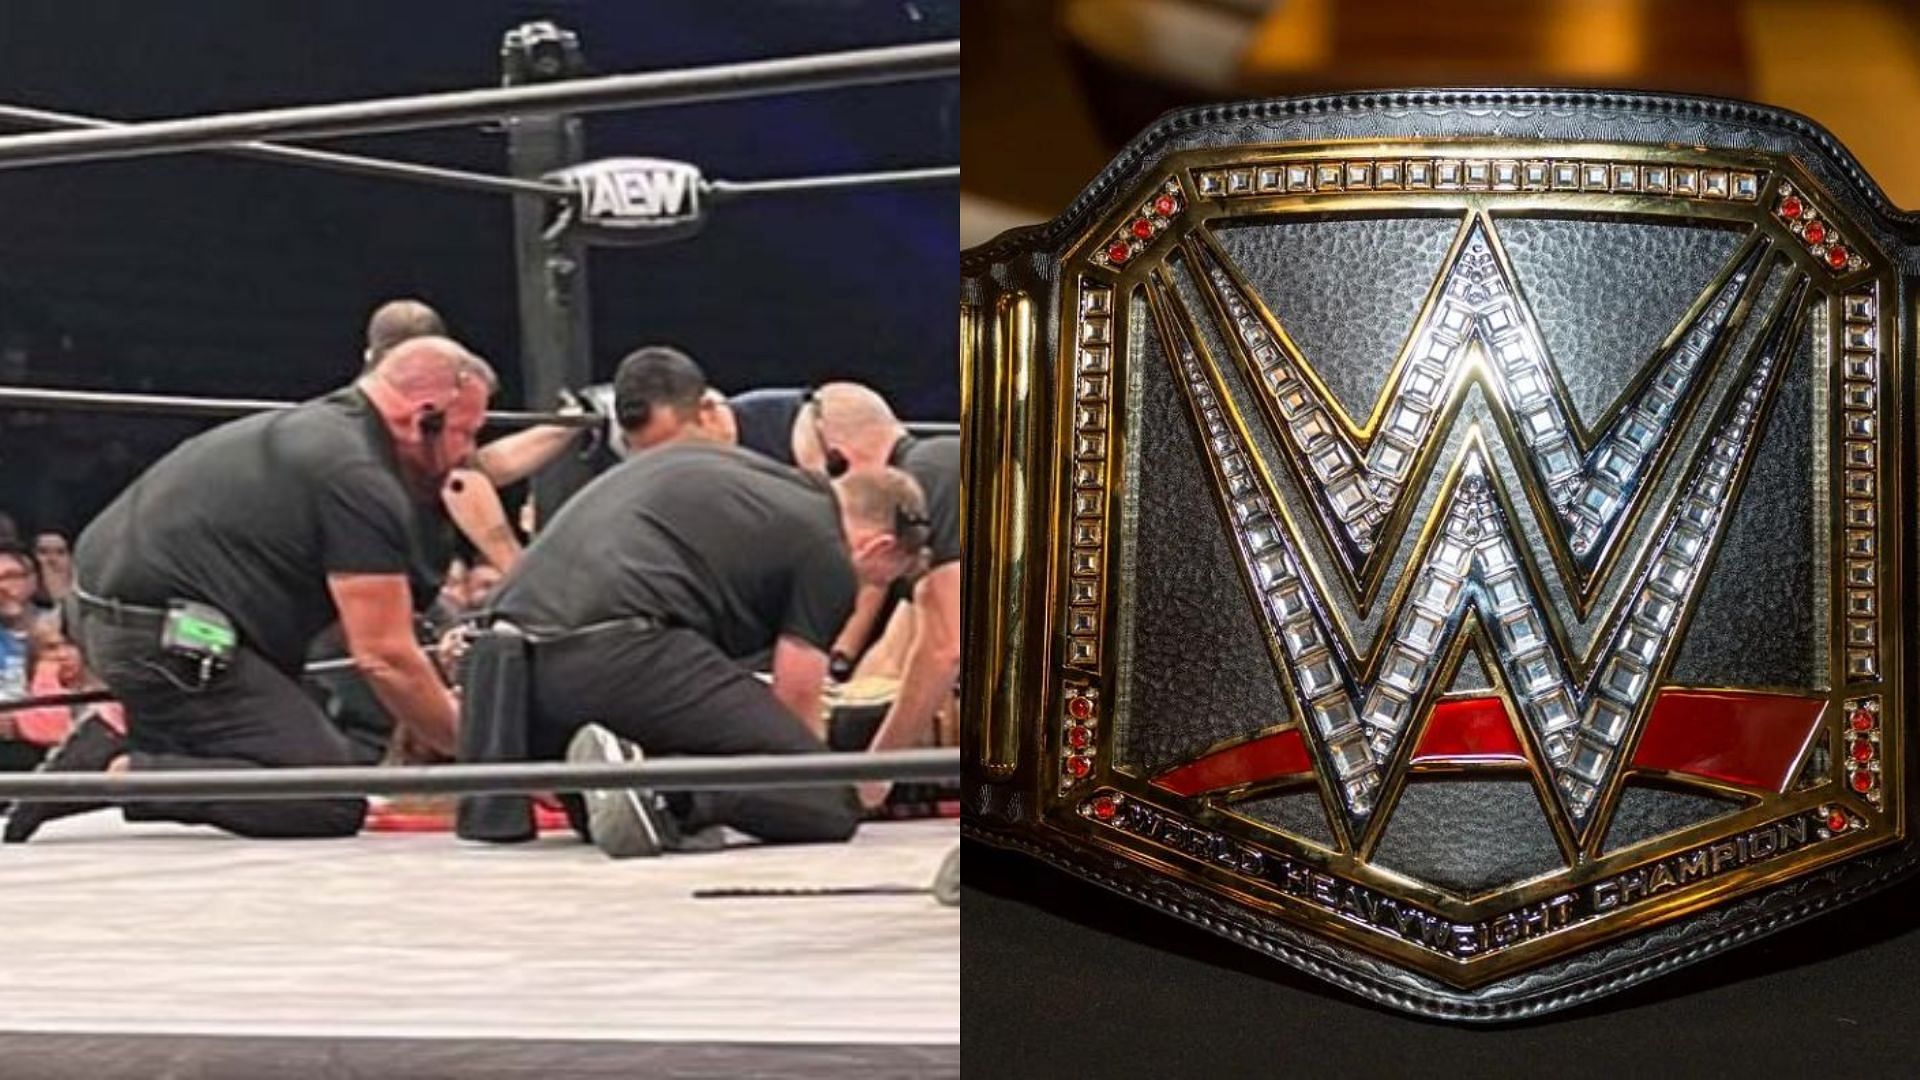 The WWE Championship is one of the top prizes in the promotion